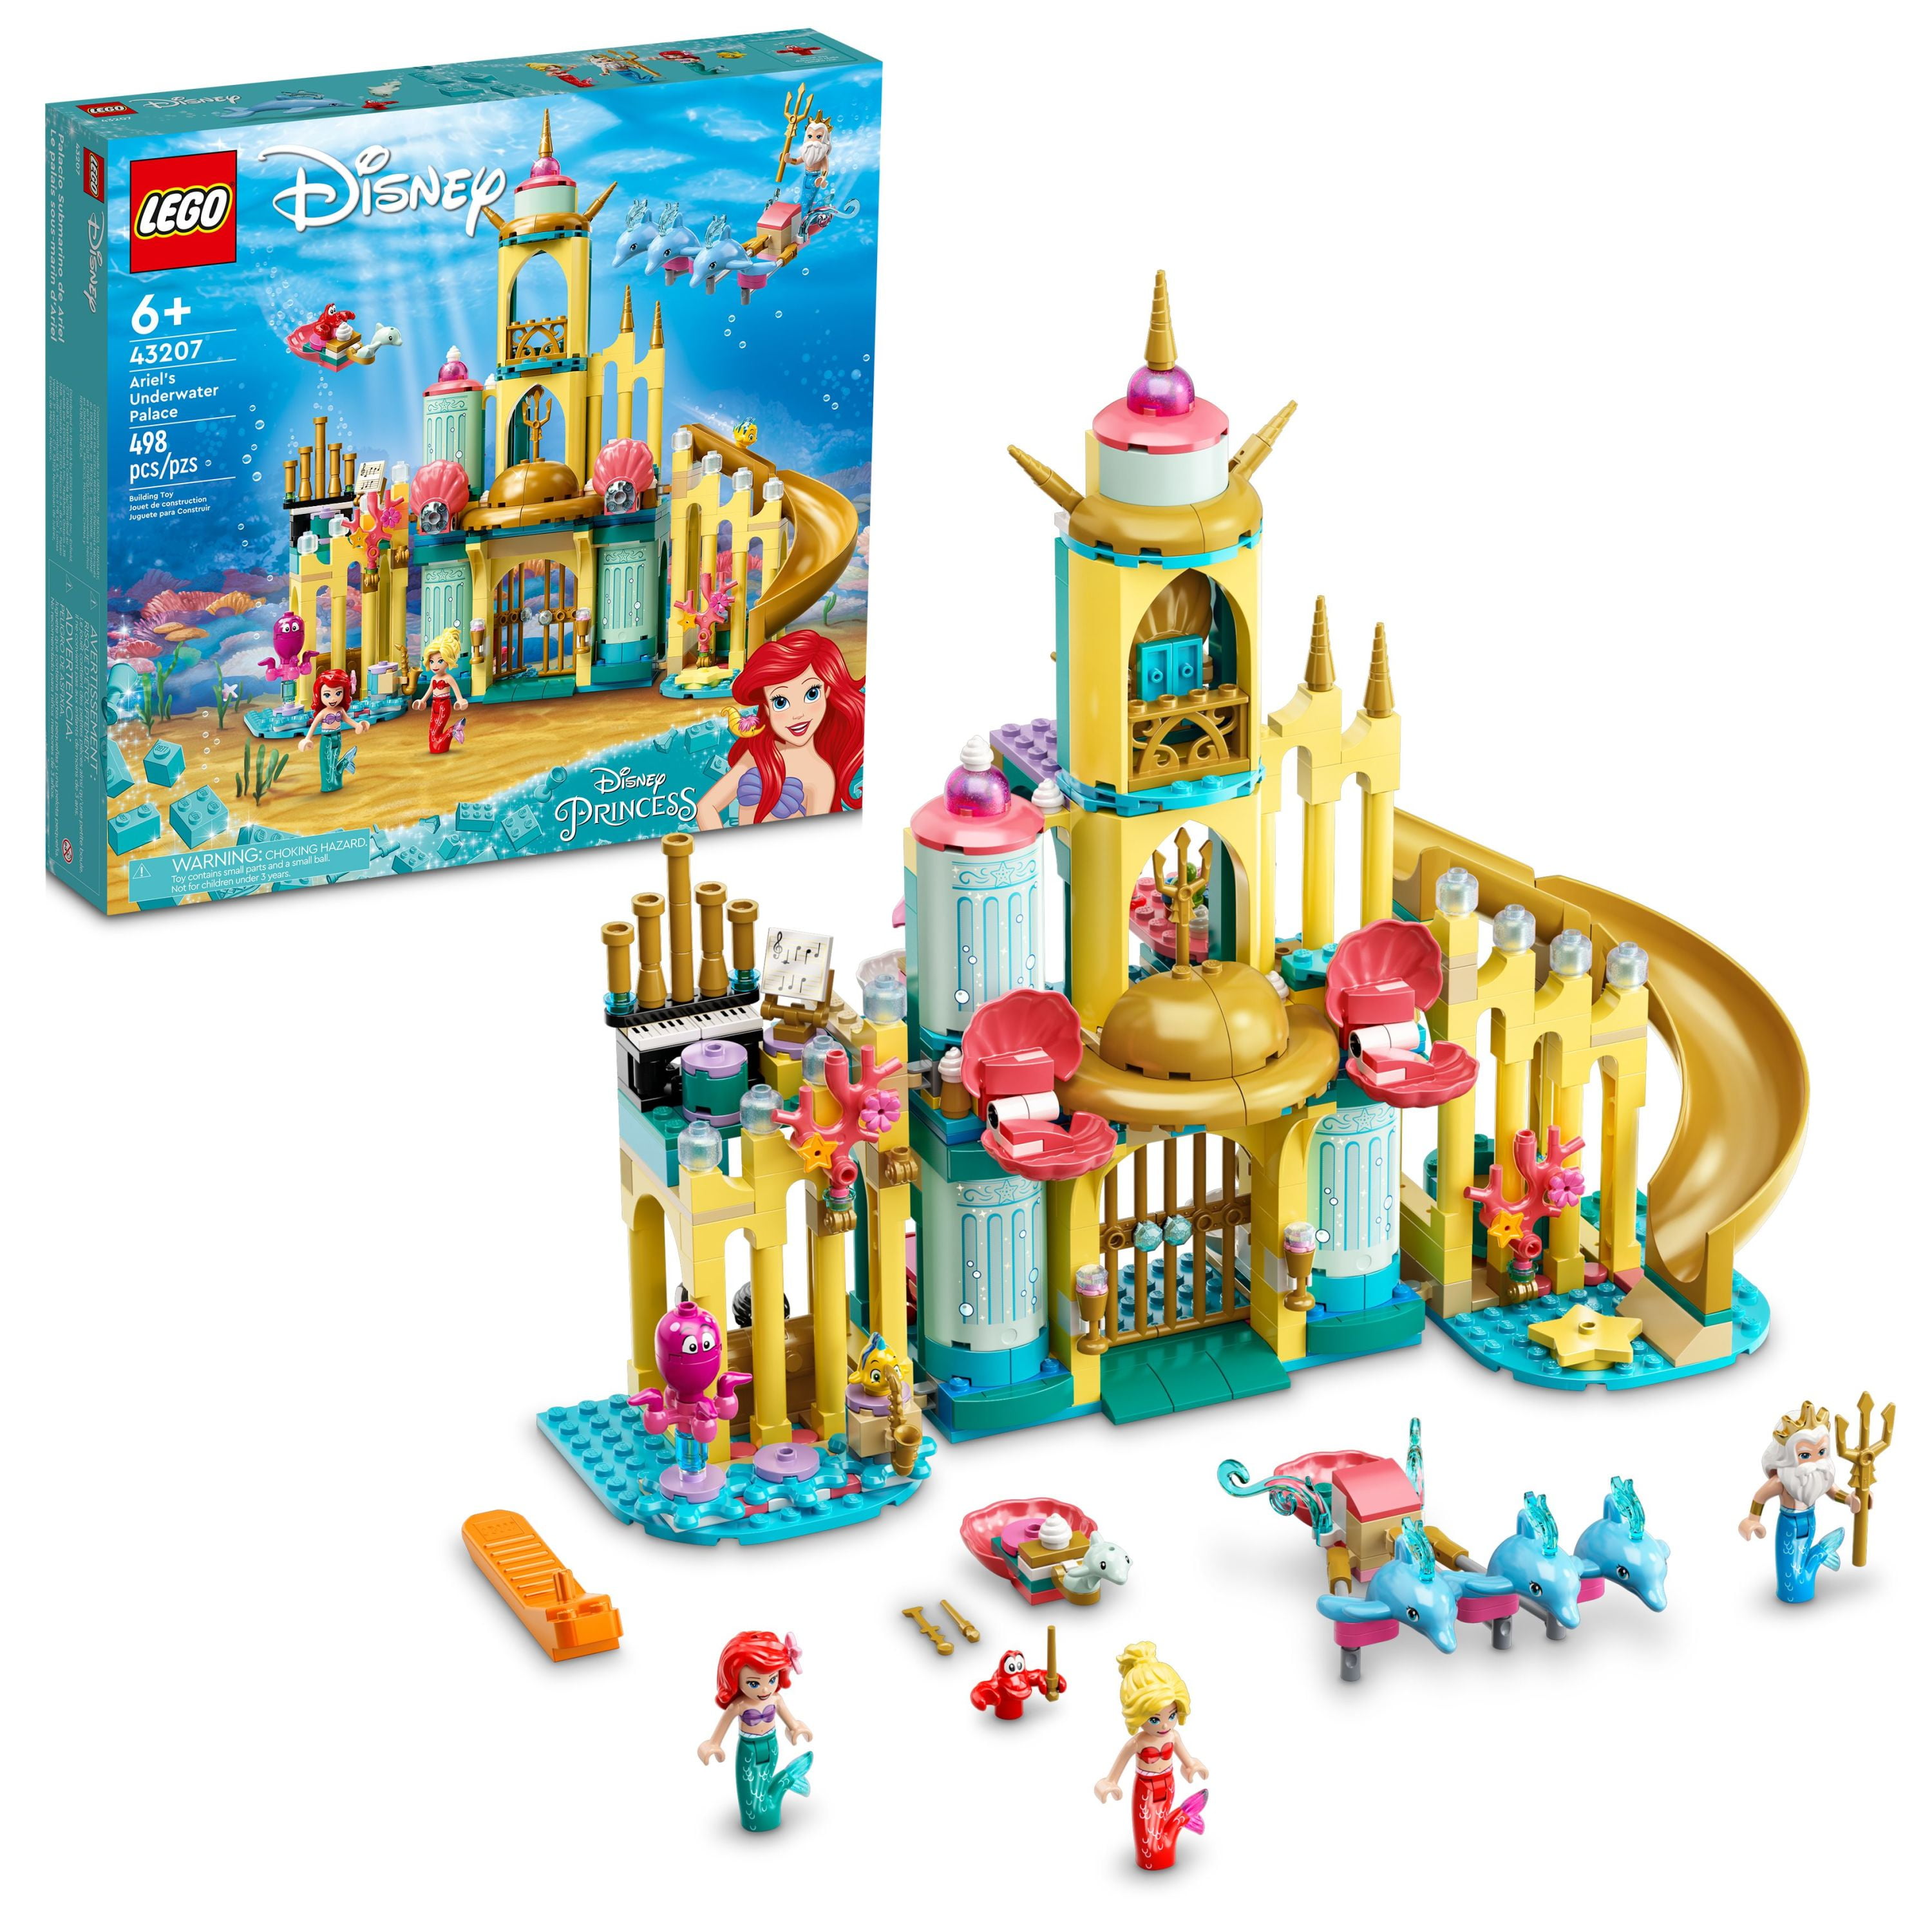 Disney Princess Palace 43207, Buildable Princess Castle Toy, Disney Gift Idea for Kids, Girls and Boys Aged 6+ with The Mermaid Mini-Doll Figure & Dolphin Figures - Walmart.com